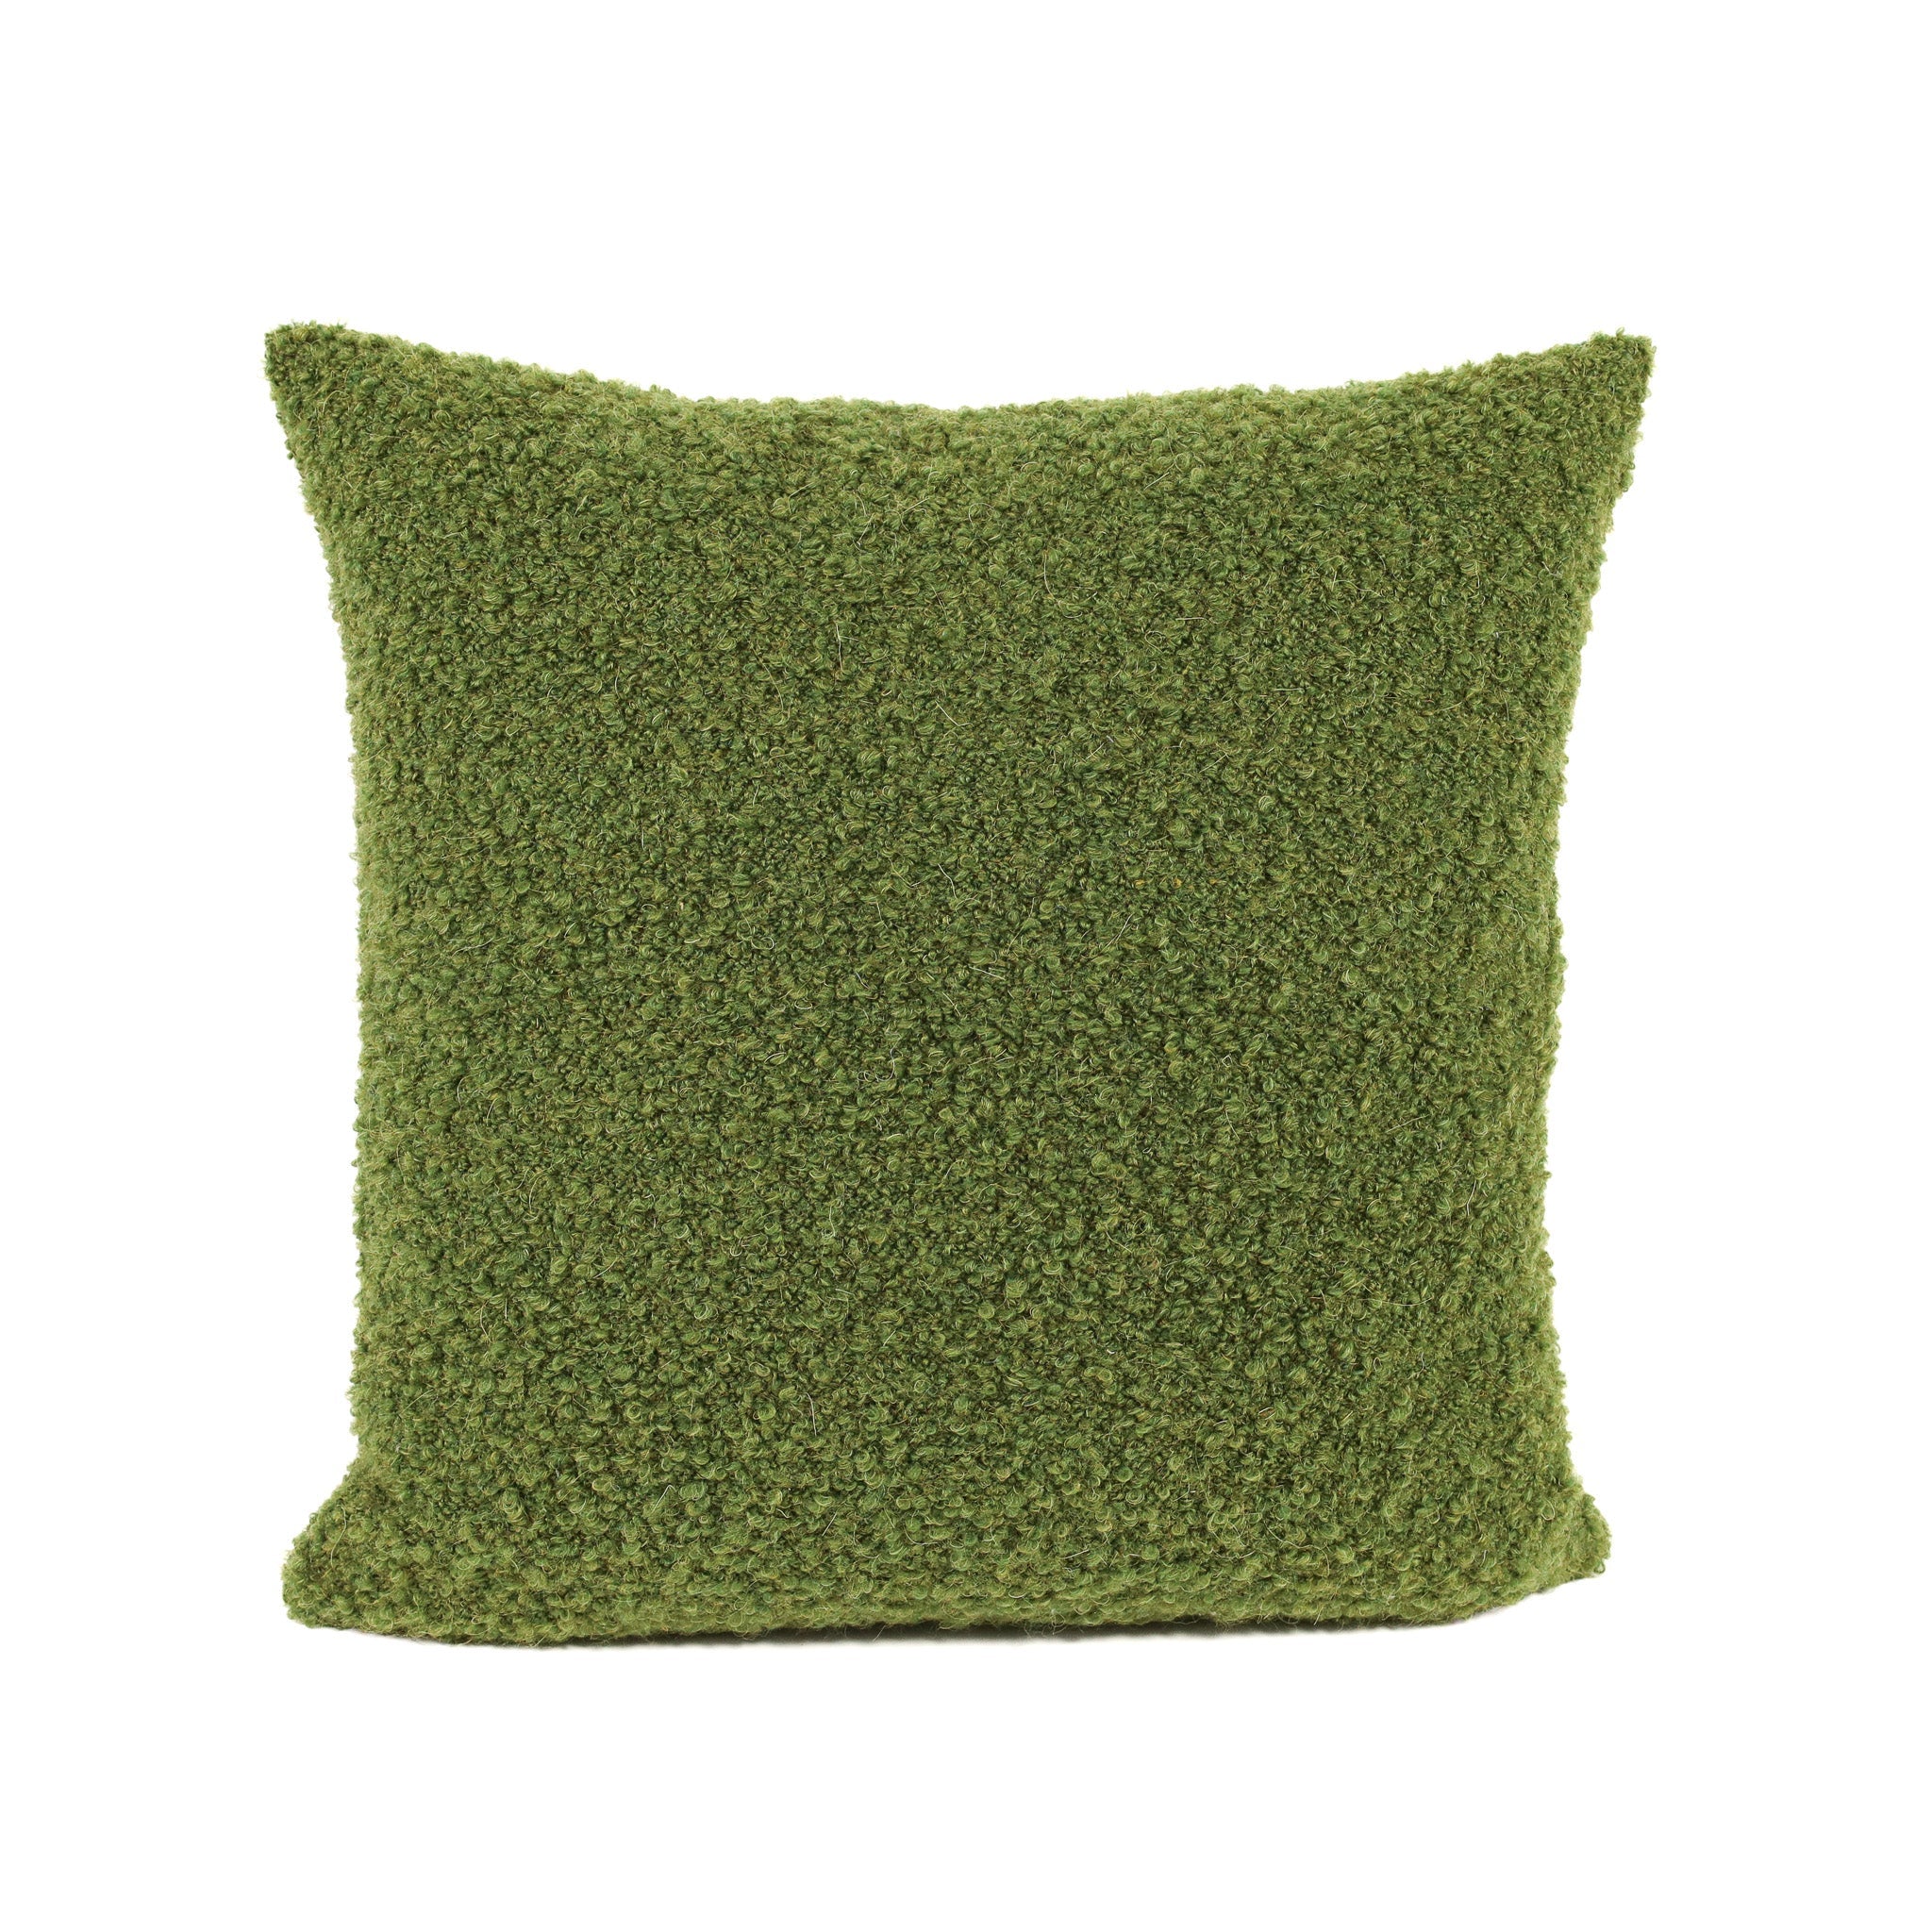 kandi pillow by uniquity at adorn.house